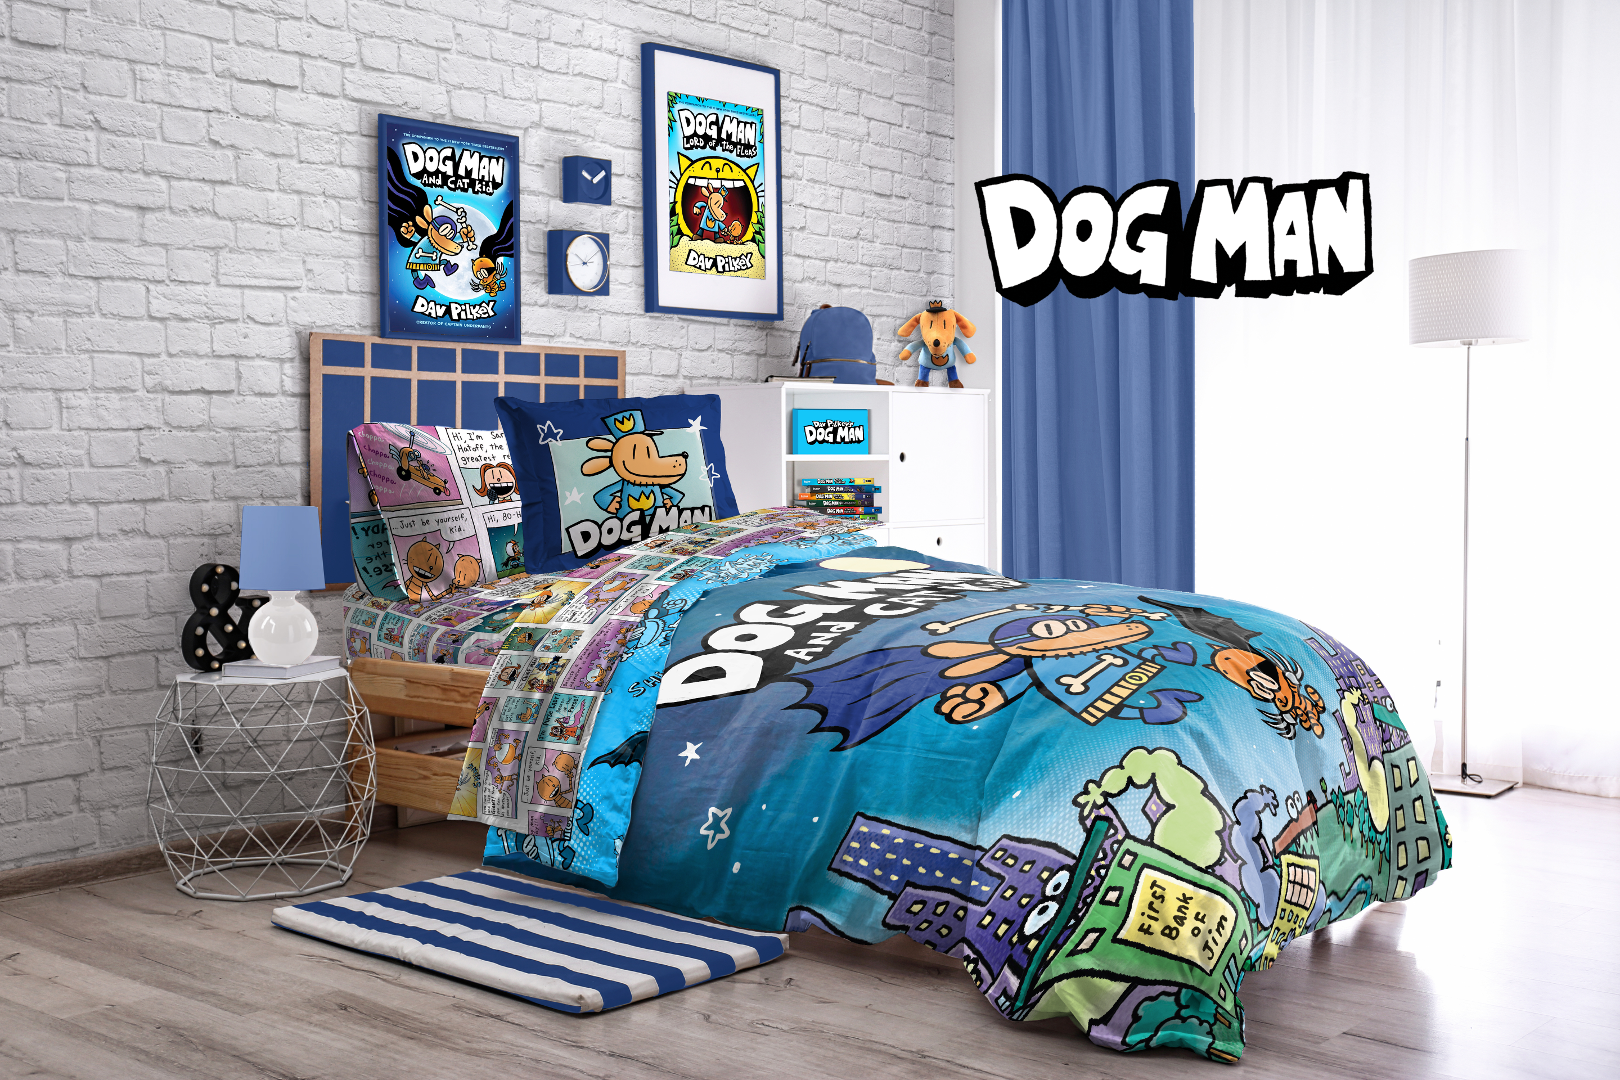 Fade Resistant Microfiber Sheets Jay Franco Dog Man Supa Buddies Twin Sheet Set Official Dog Man Product 3 Piece Set Super Soft and Cozy Kid’s Bedding Features Cat Kid & Lil Petey 